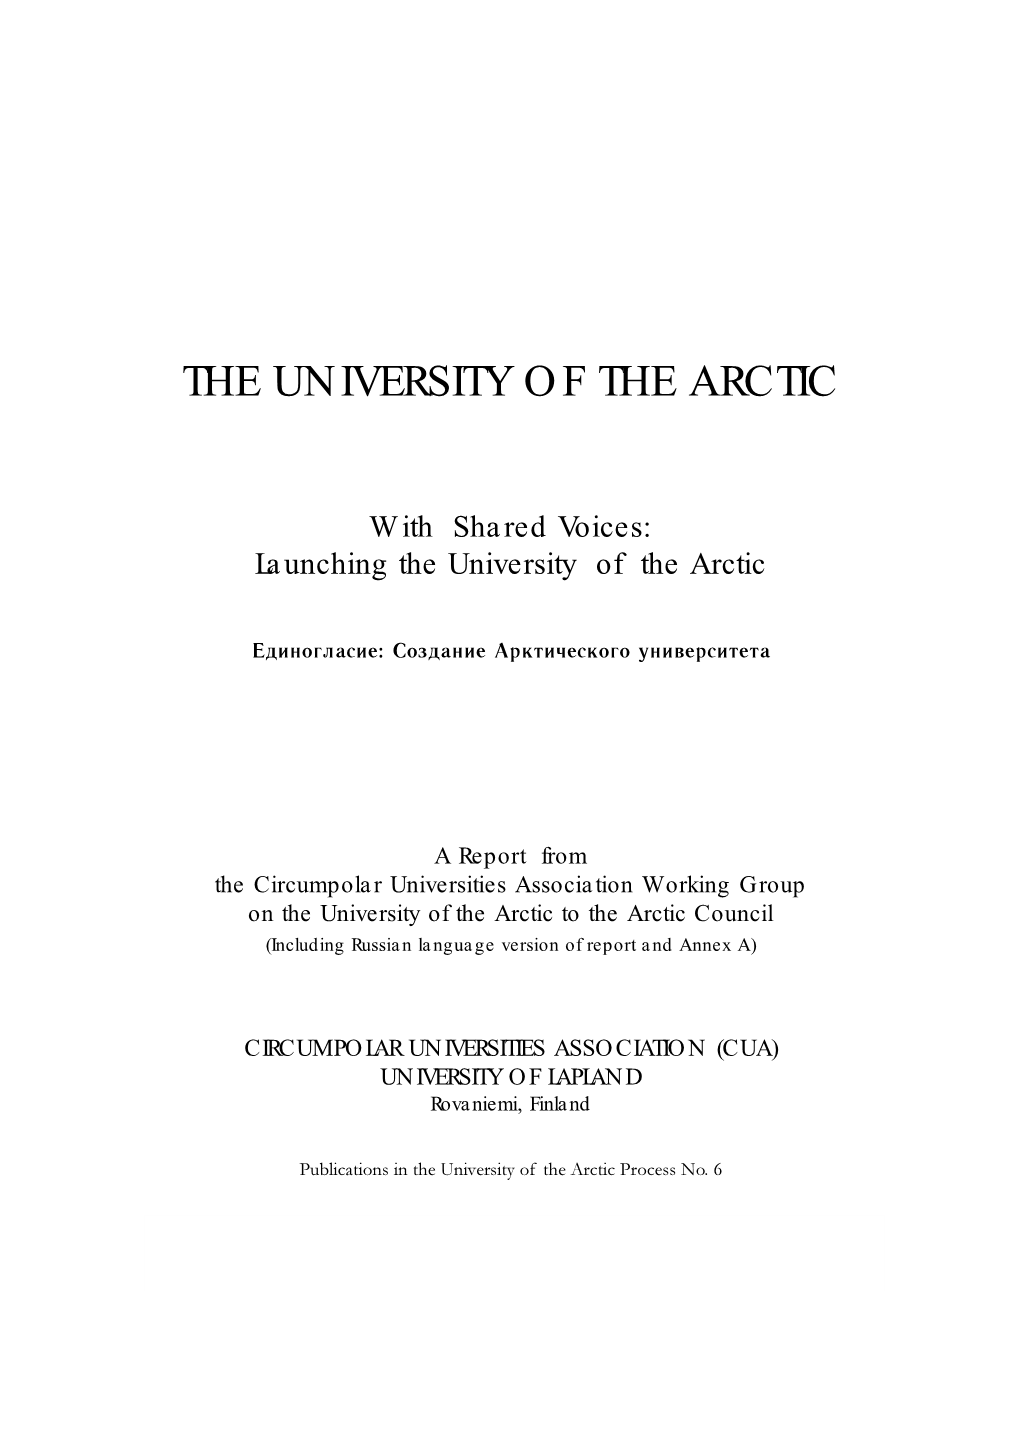 Launching the University of the Arctic